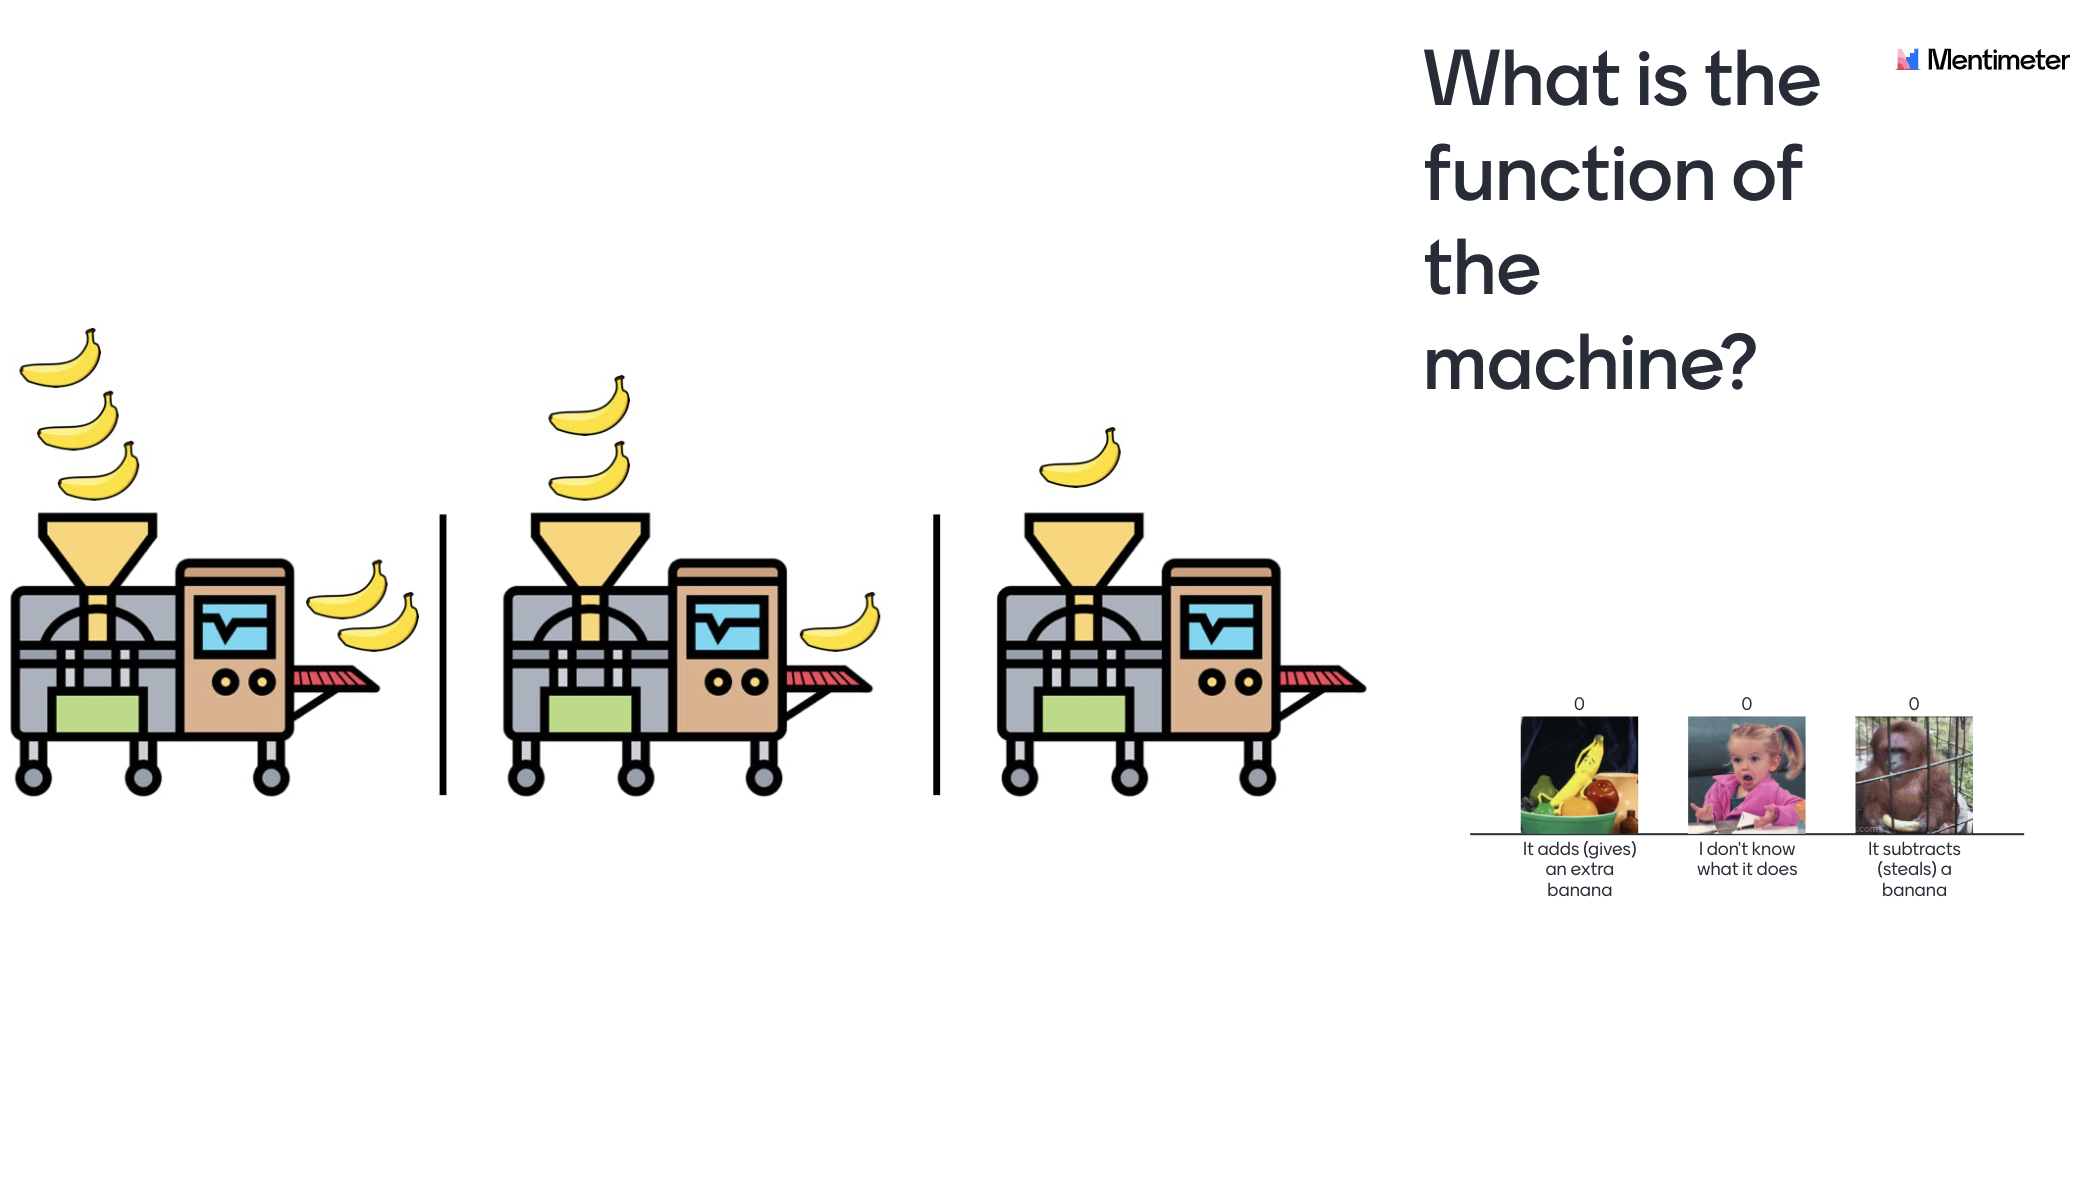 what is the function of the machine?